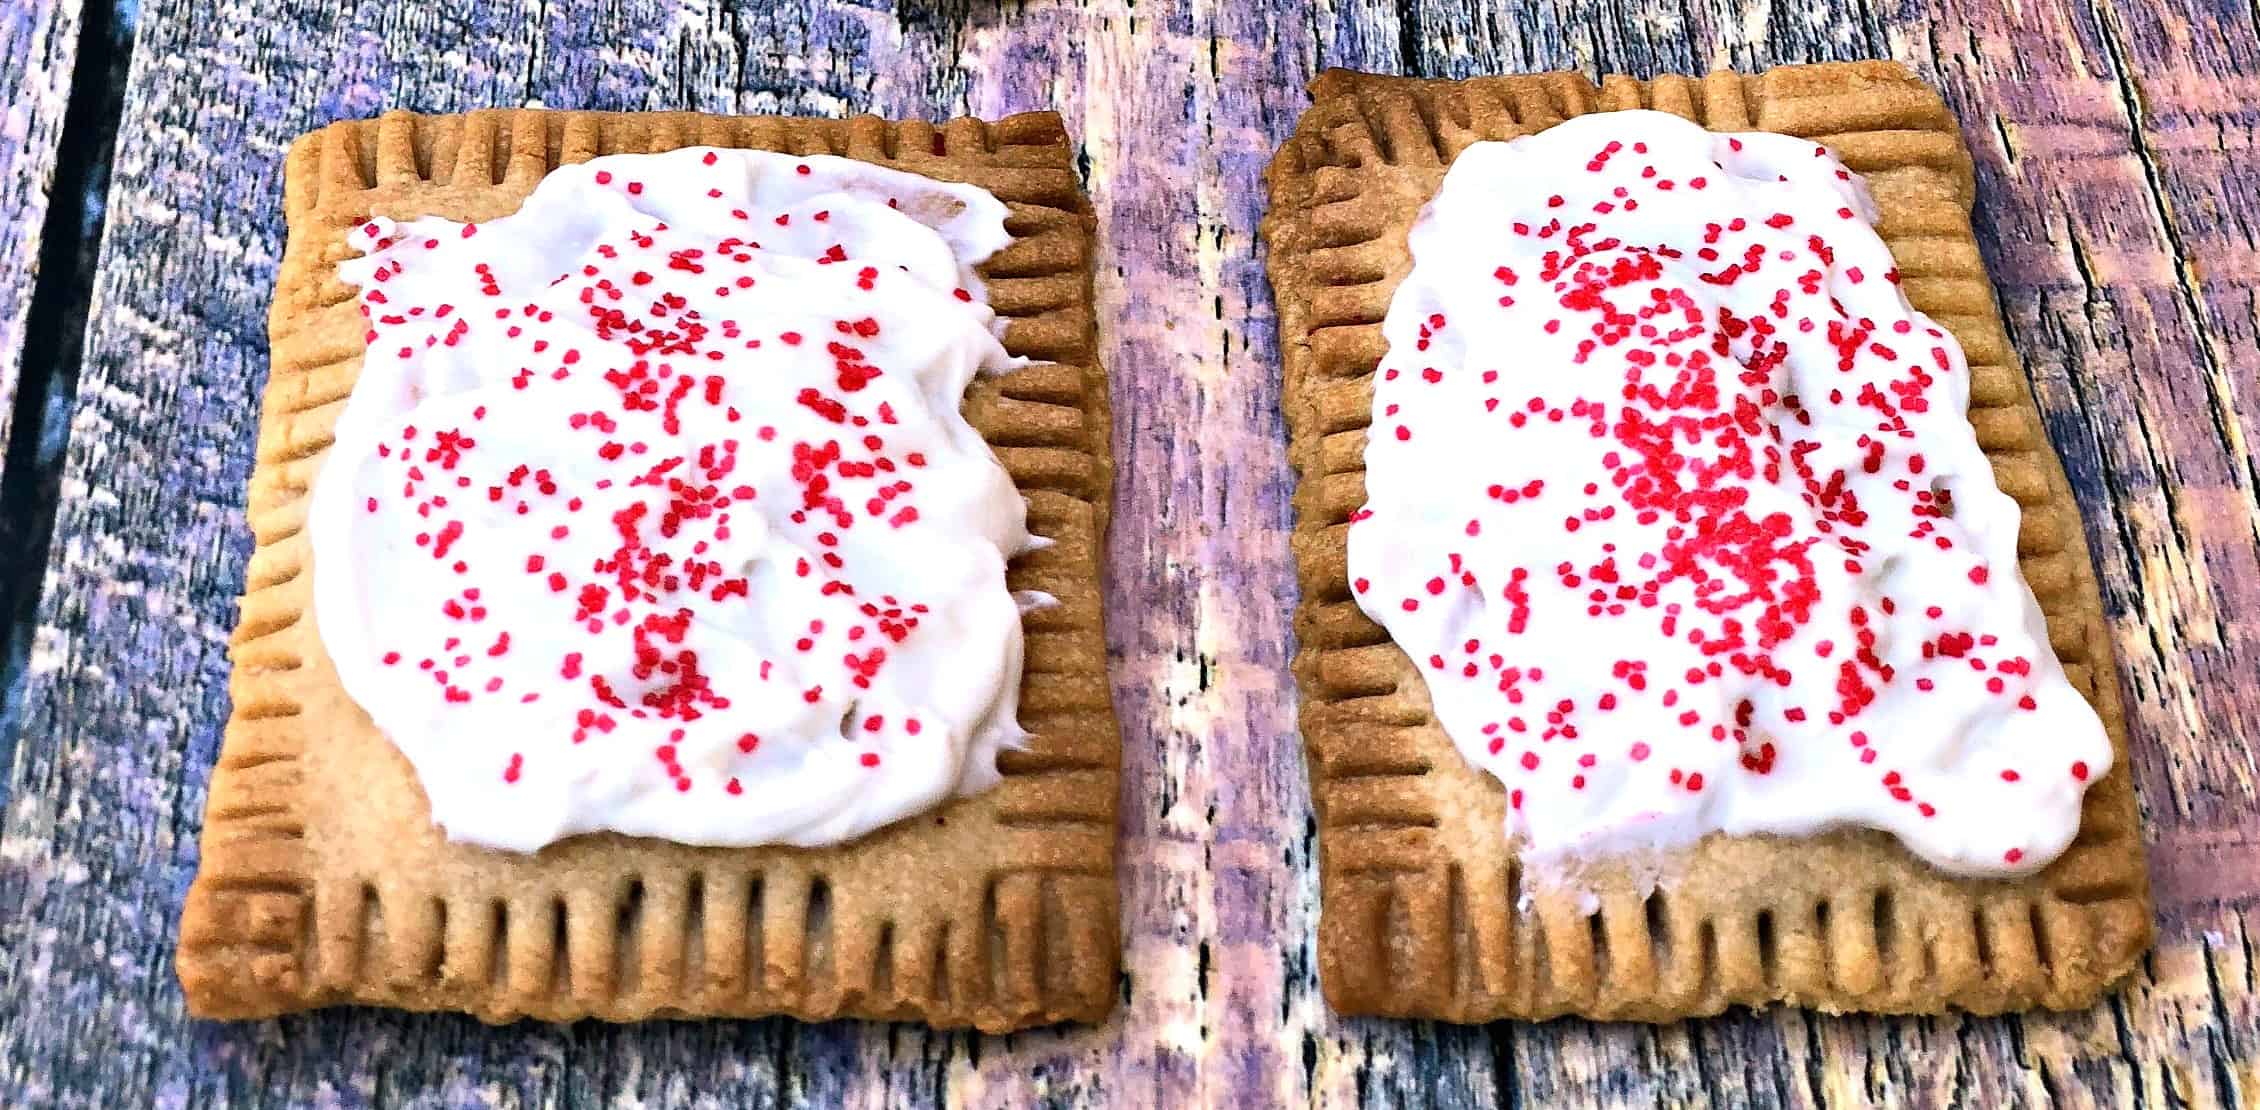 air fryer strawberry pop tarts on a multi color surface